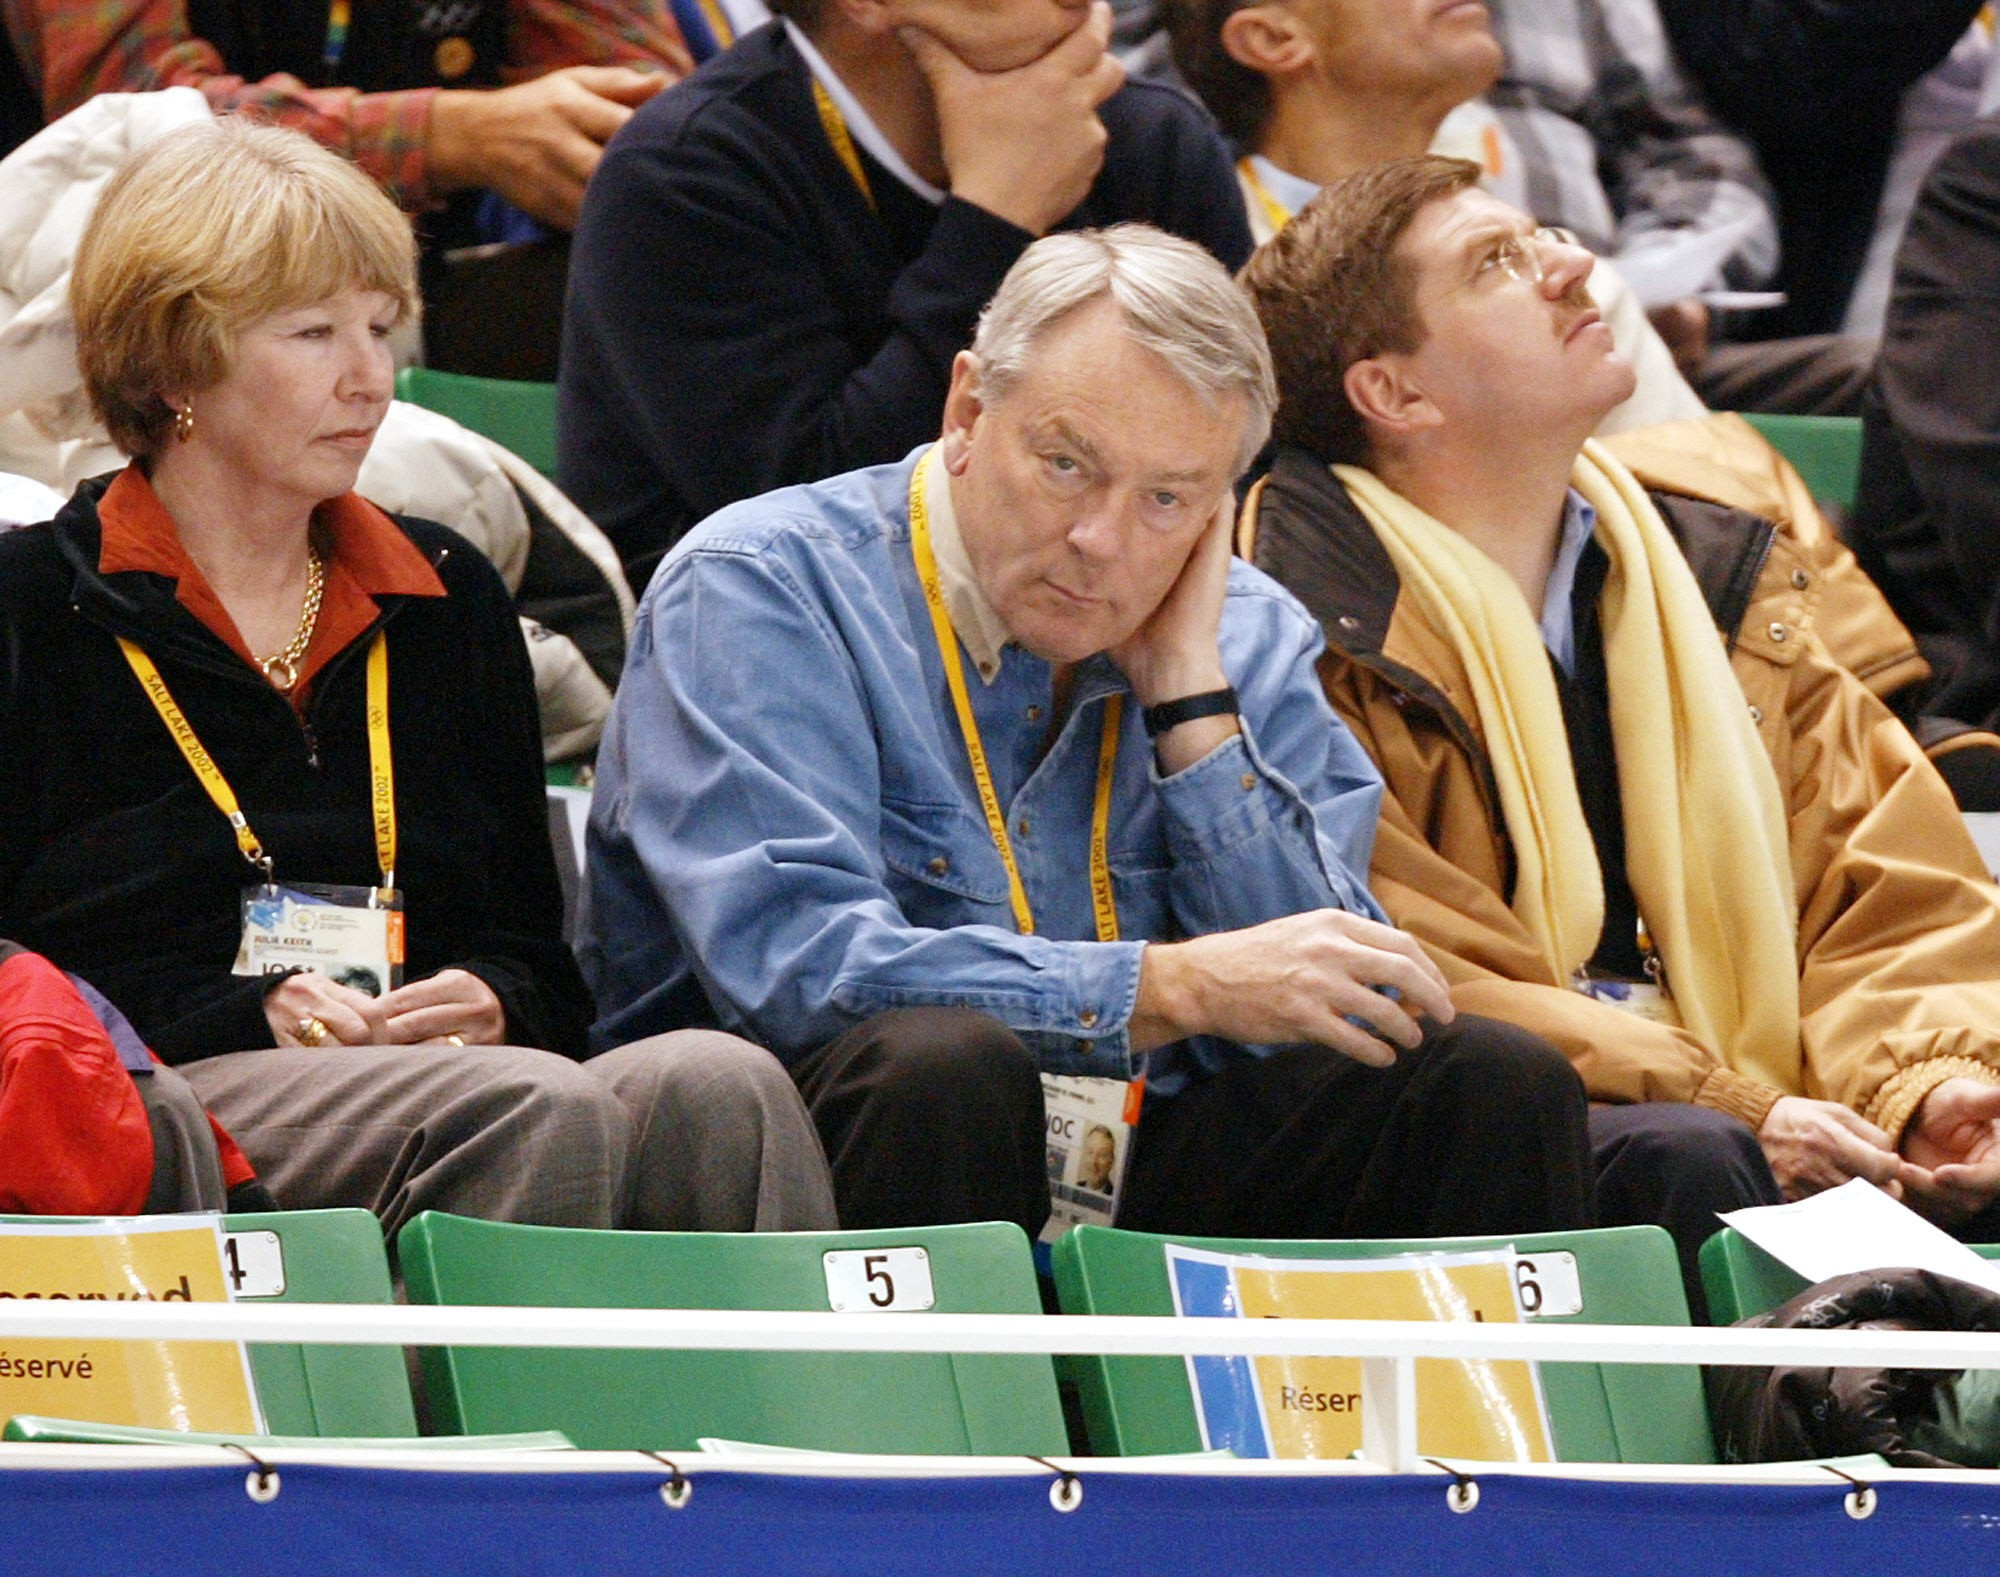 Richard Pound, centre, pictured attending the Salt Lake City 2002 Winter Olympic Games alongside current IOC President Thomas Bach, having previously led an investigation into allegations of bribery into those Olympics ©Getty Images